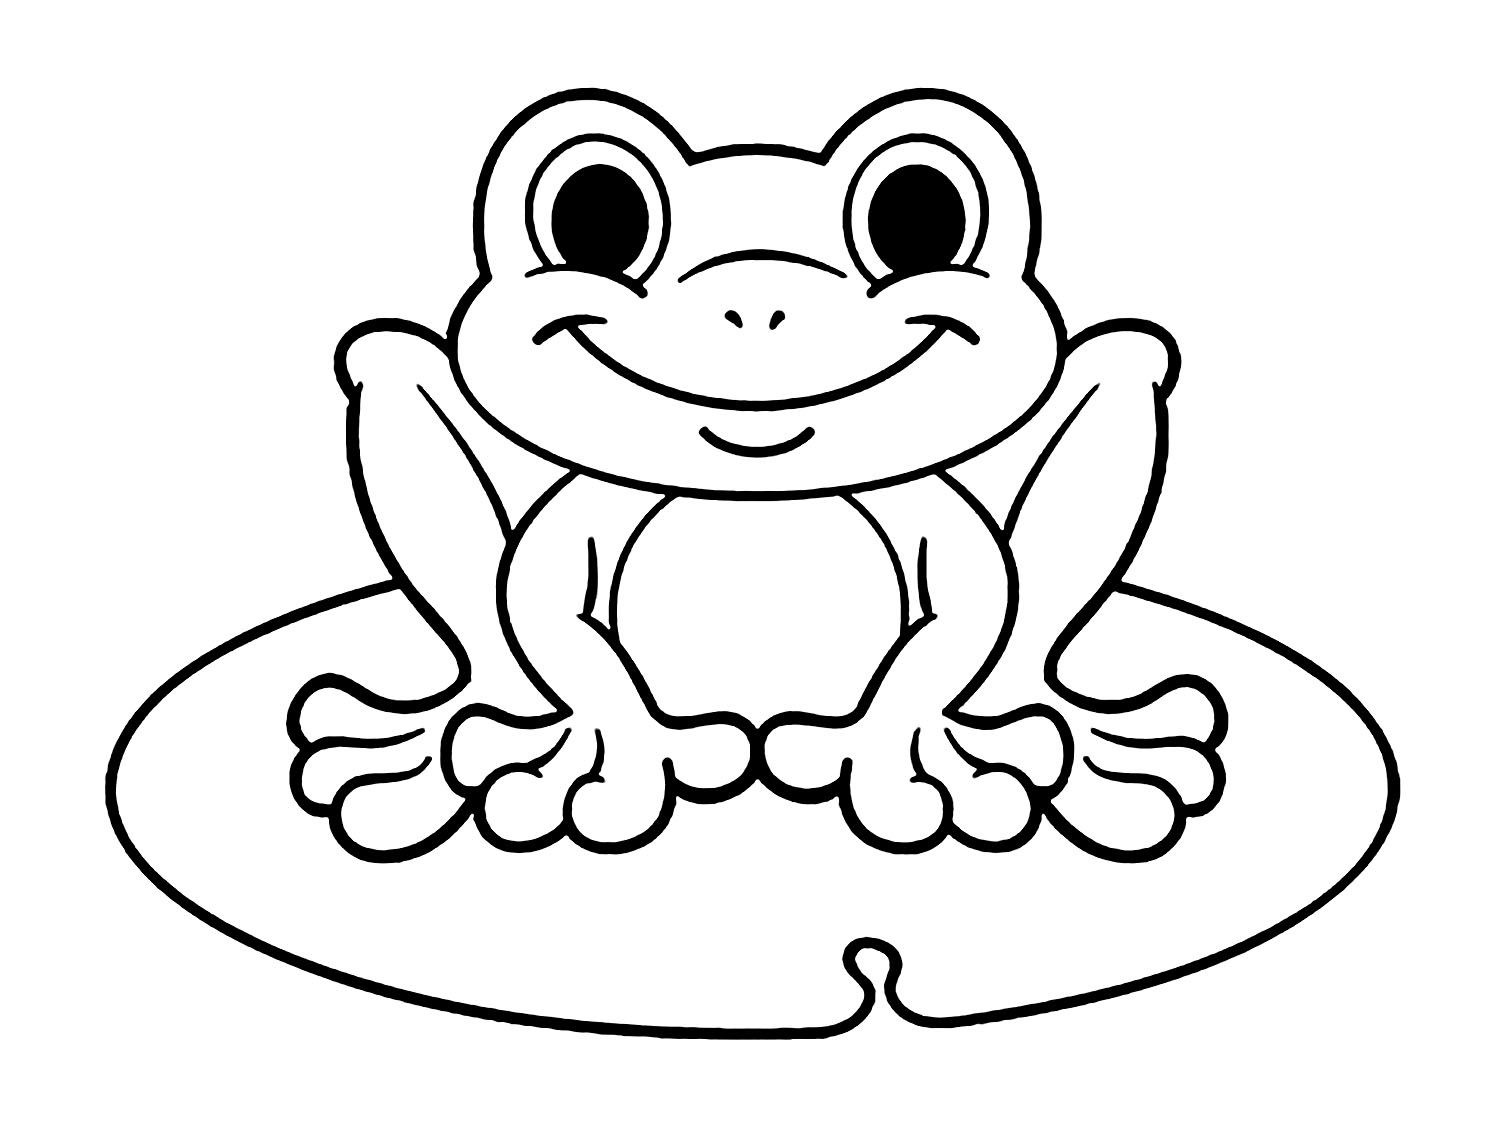 Printable Pictures Of Frogs